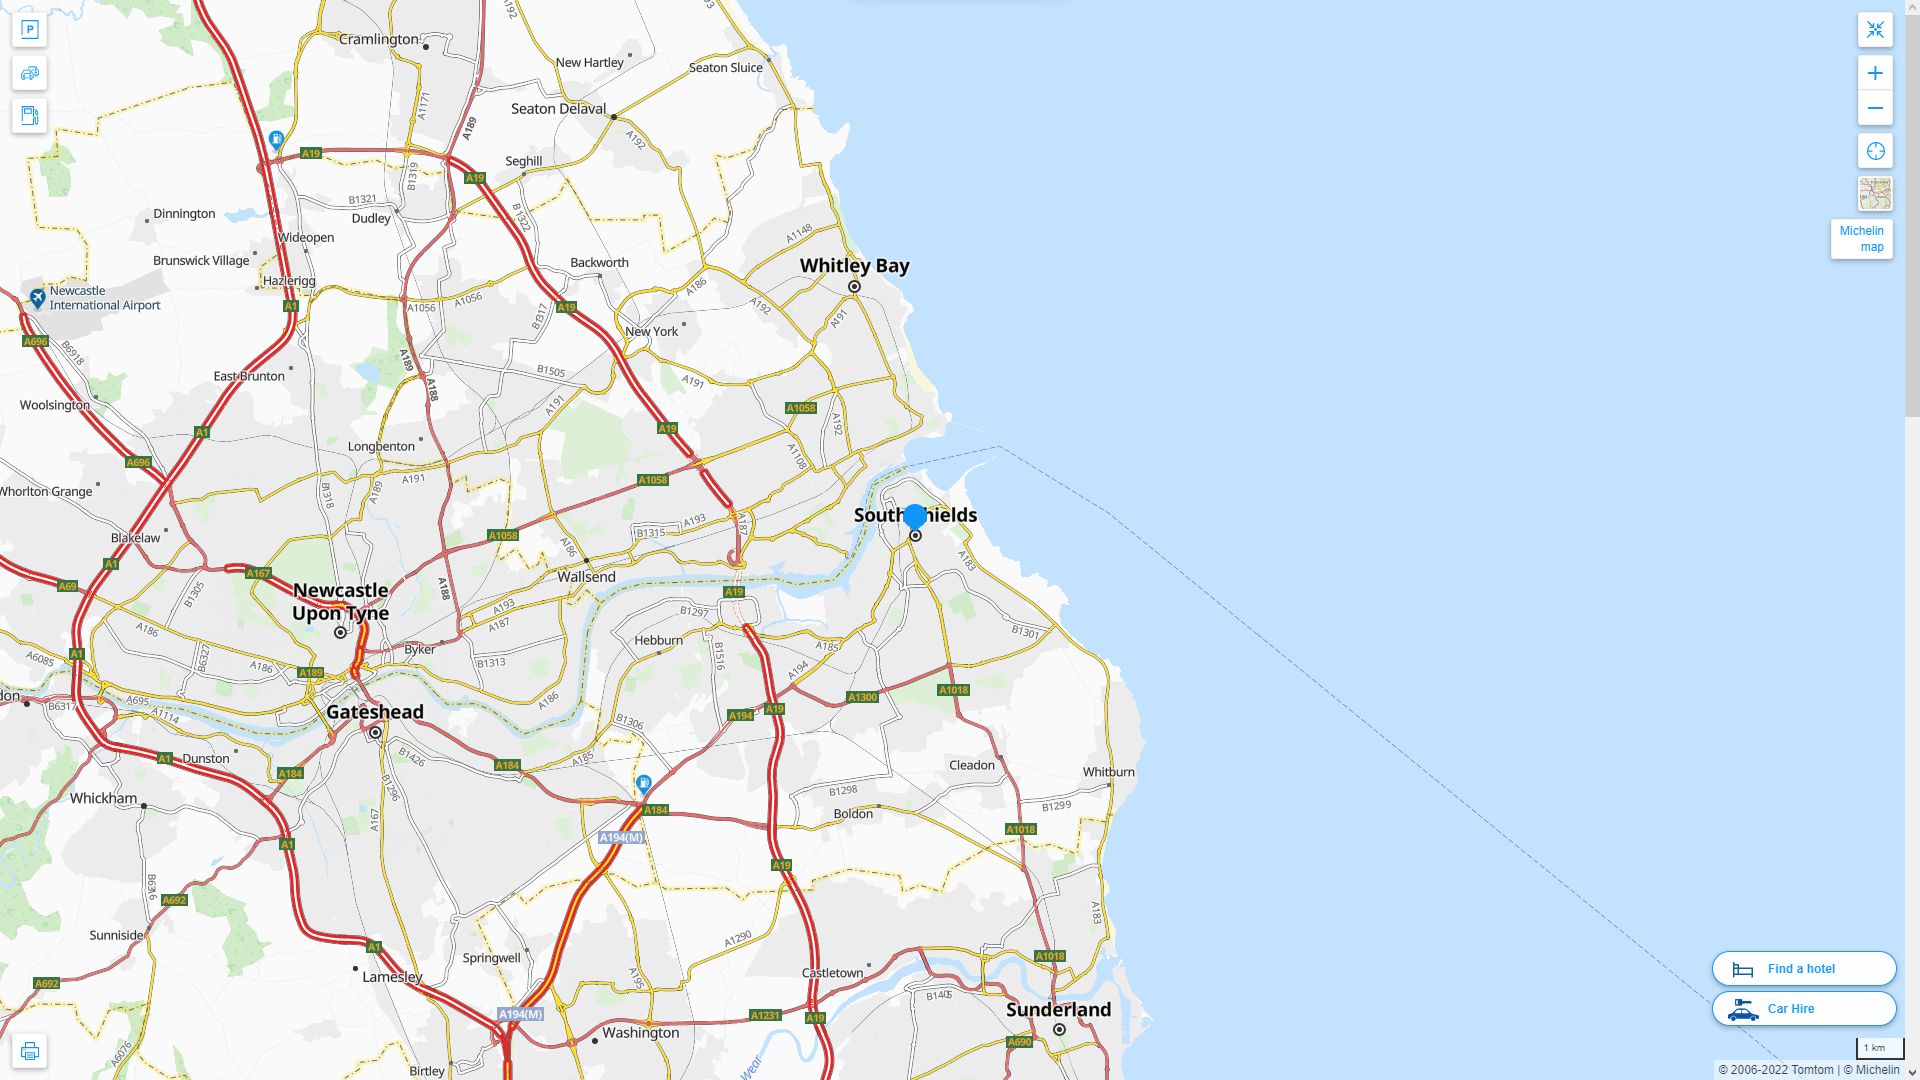 South Shields Highway and Road Map